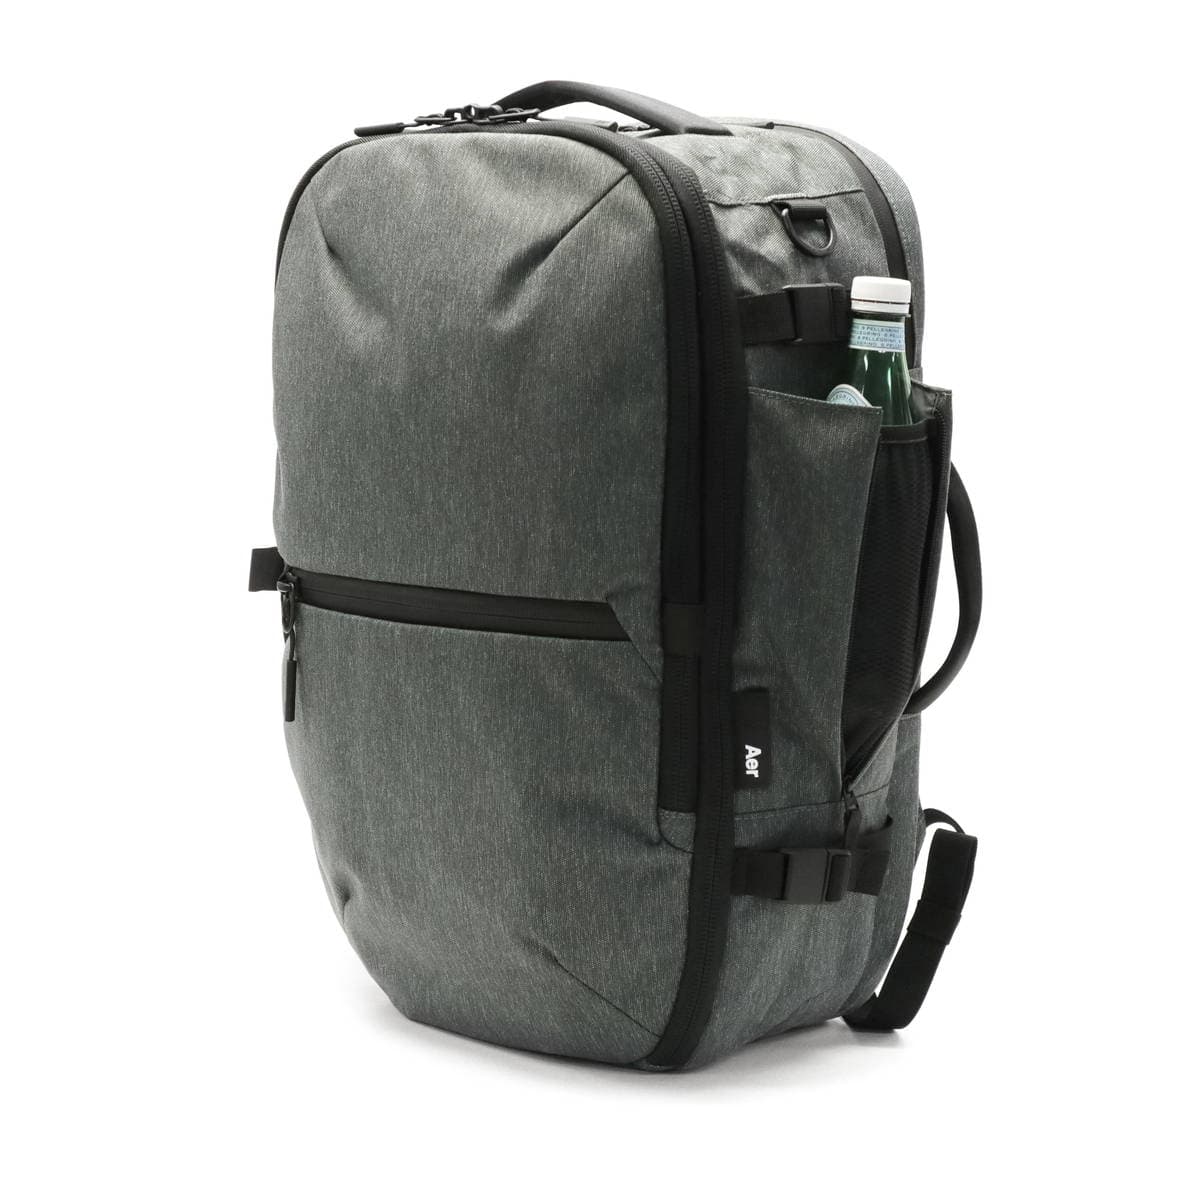 Aer エアー Travel Collection Travel Pack 3 バックパック 35L